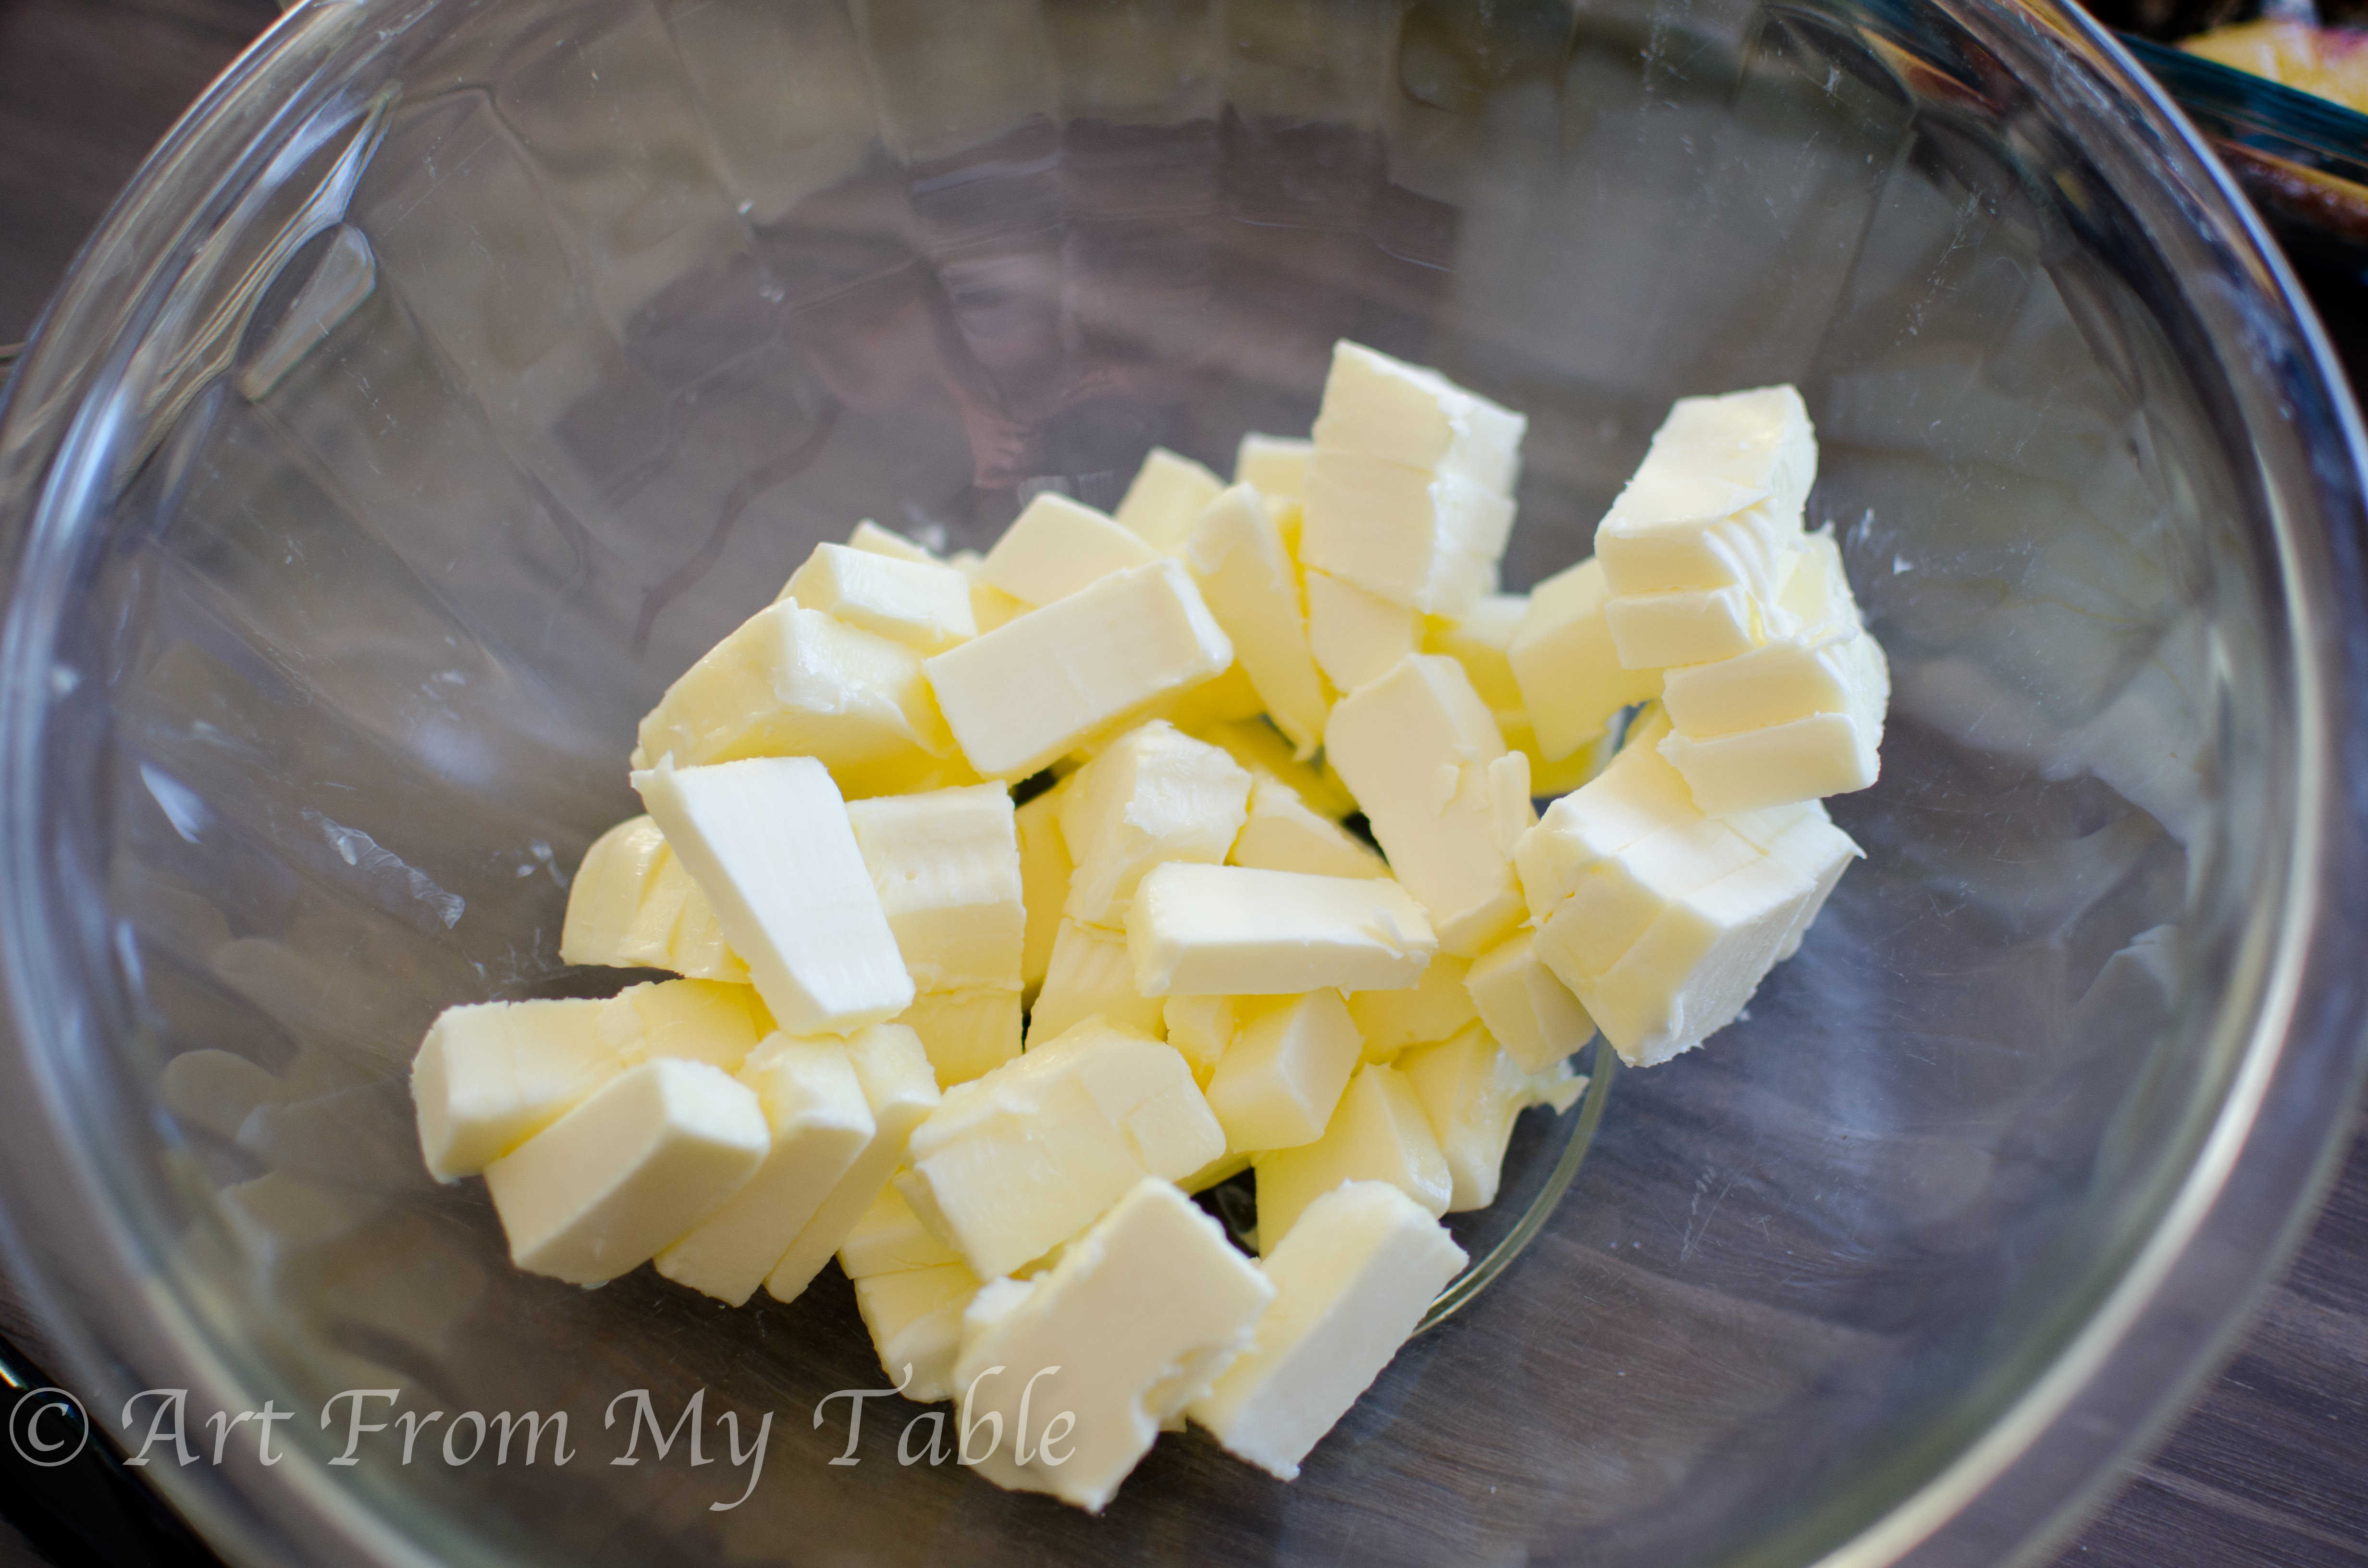 2 sticks of butter cut into cubes in a glass bowl.